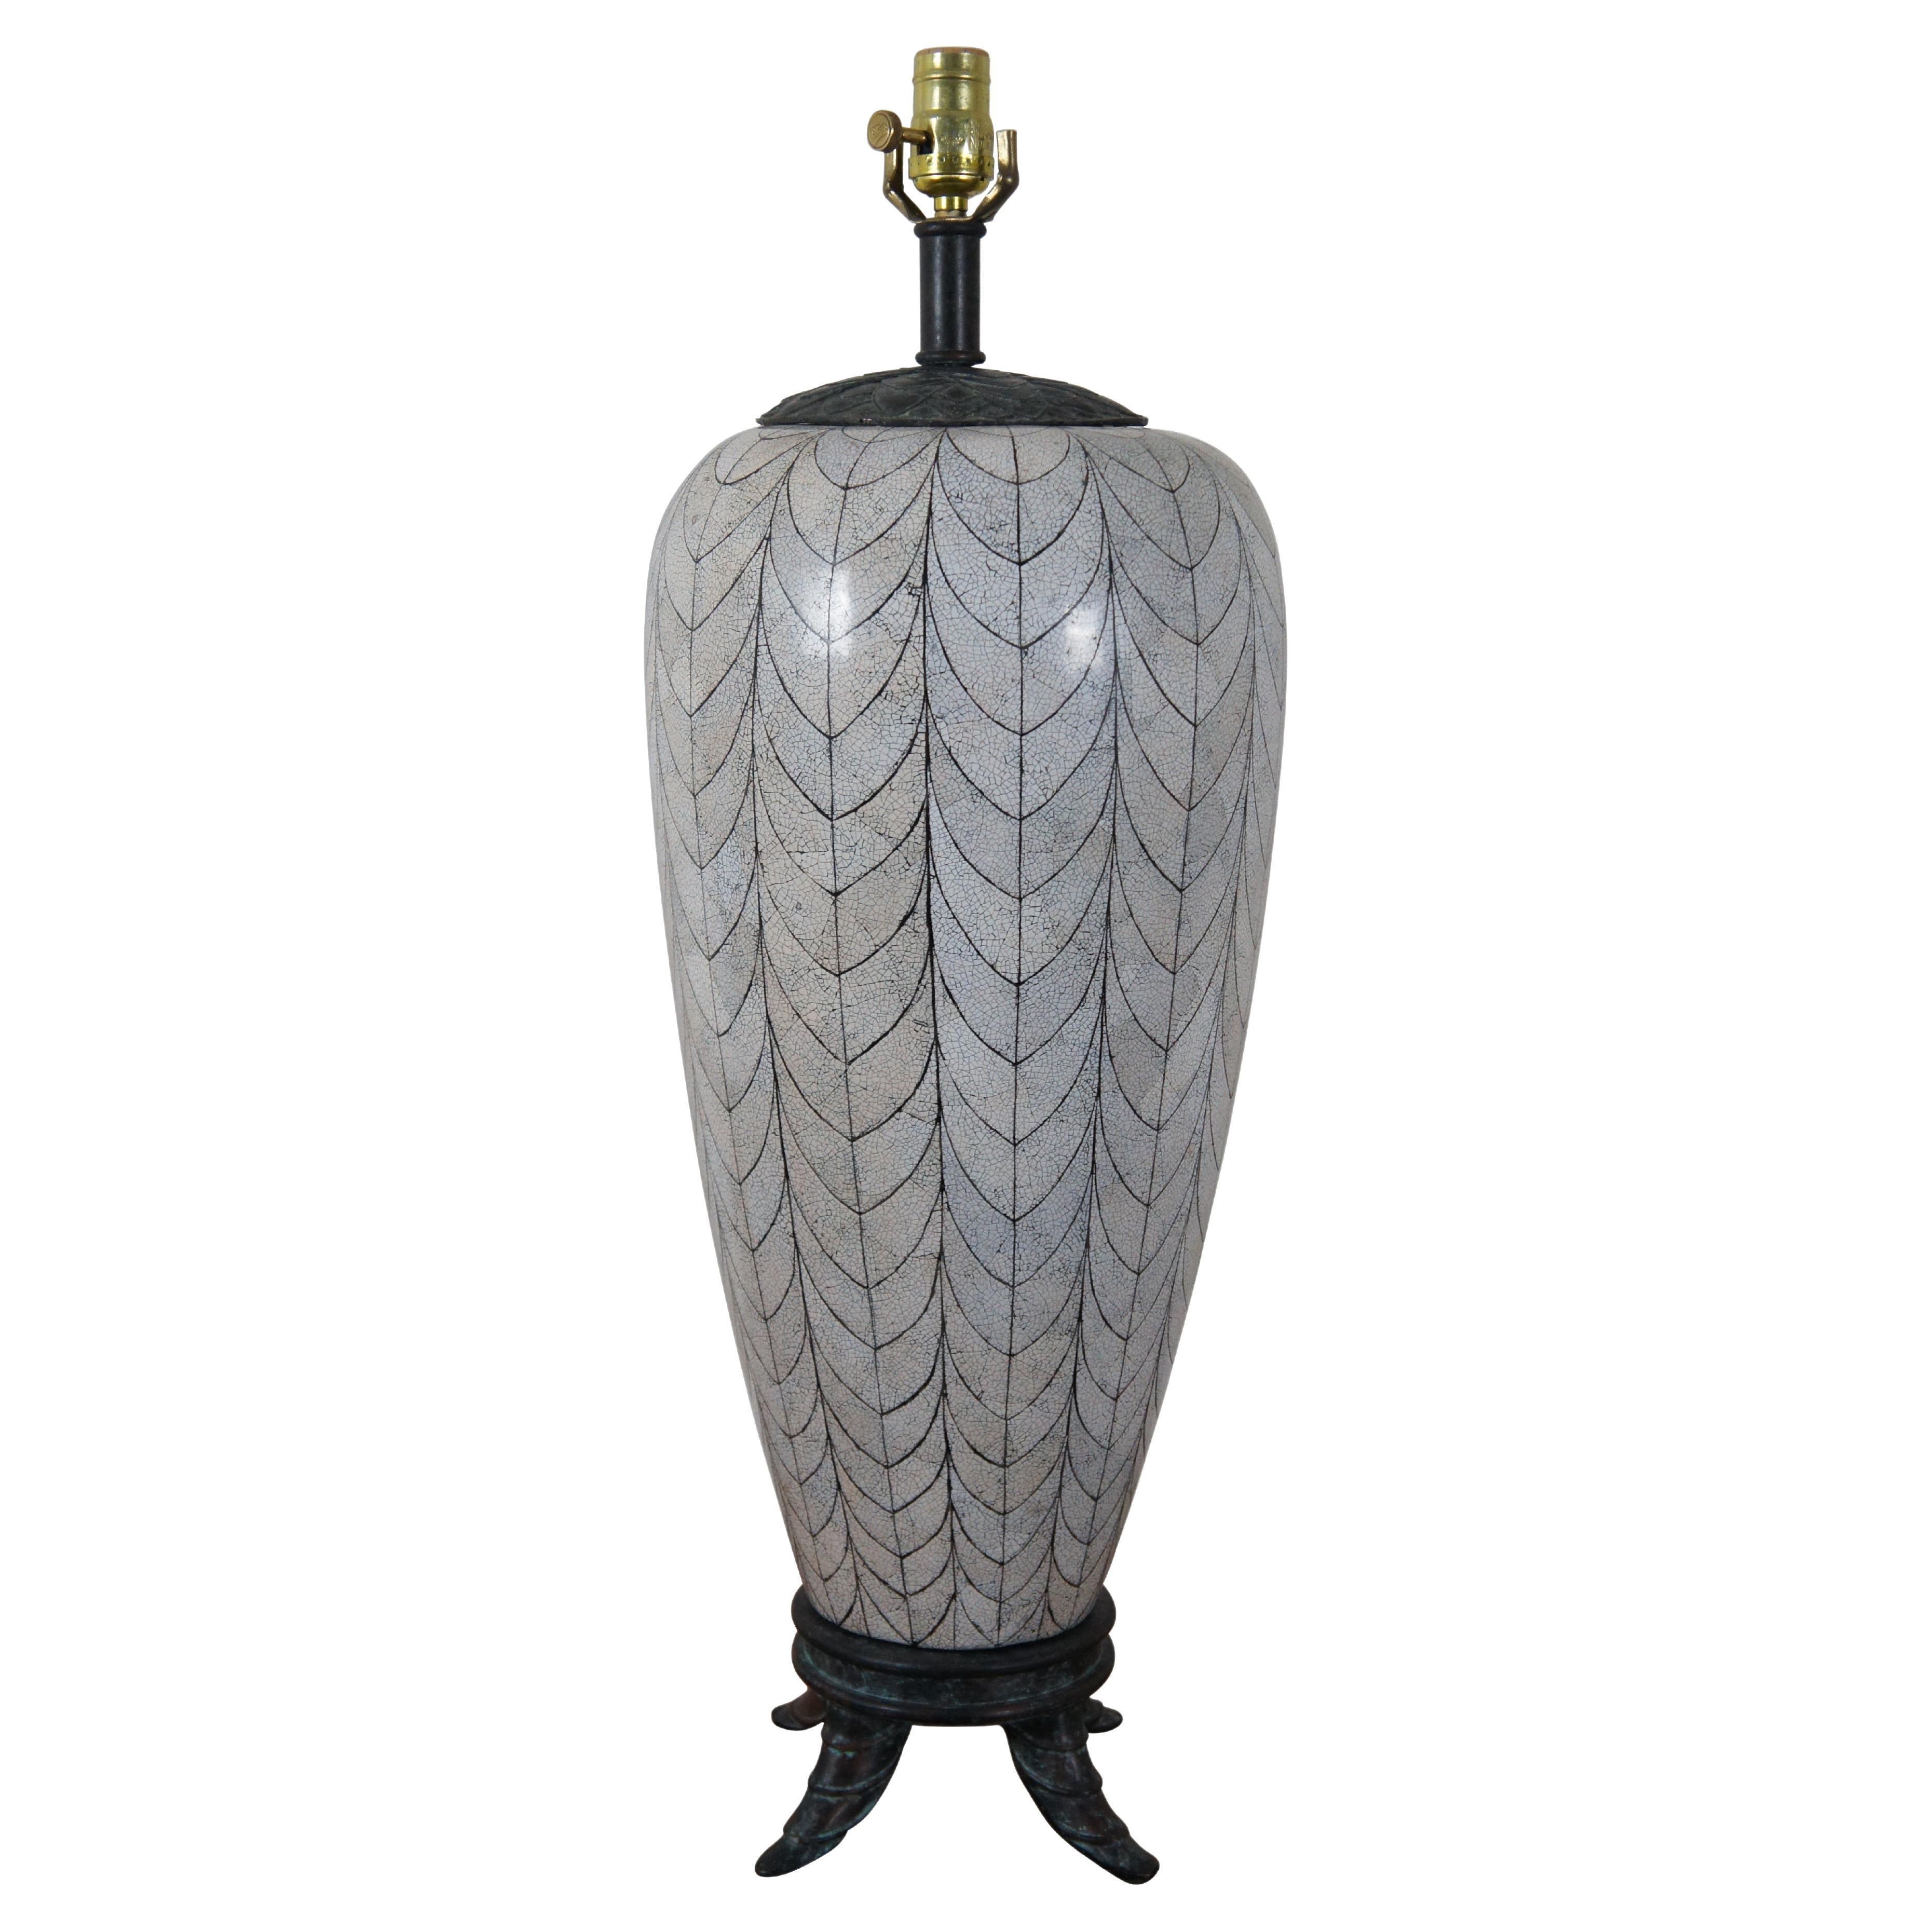 Maitland Smith Bronze & Shell Mosaic Footed Ginger Jar Urn Table Lamp 30" (lampe de table) en vente